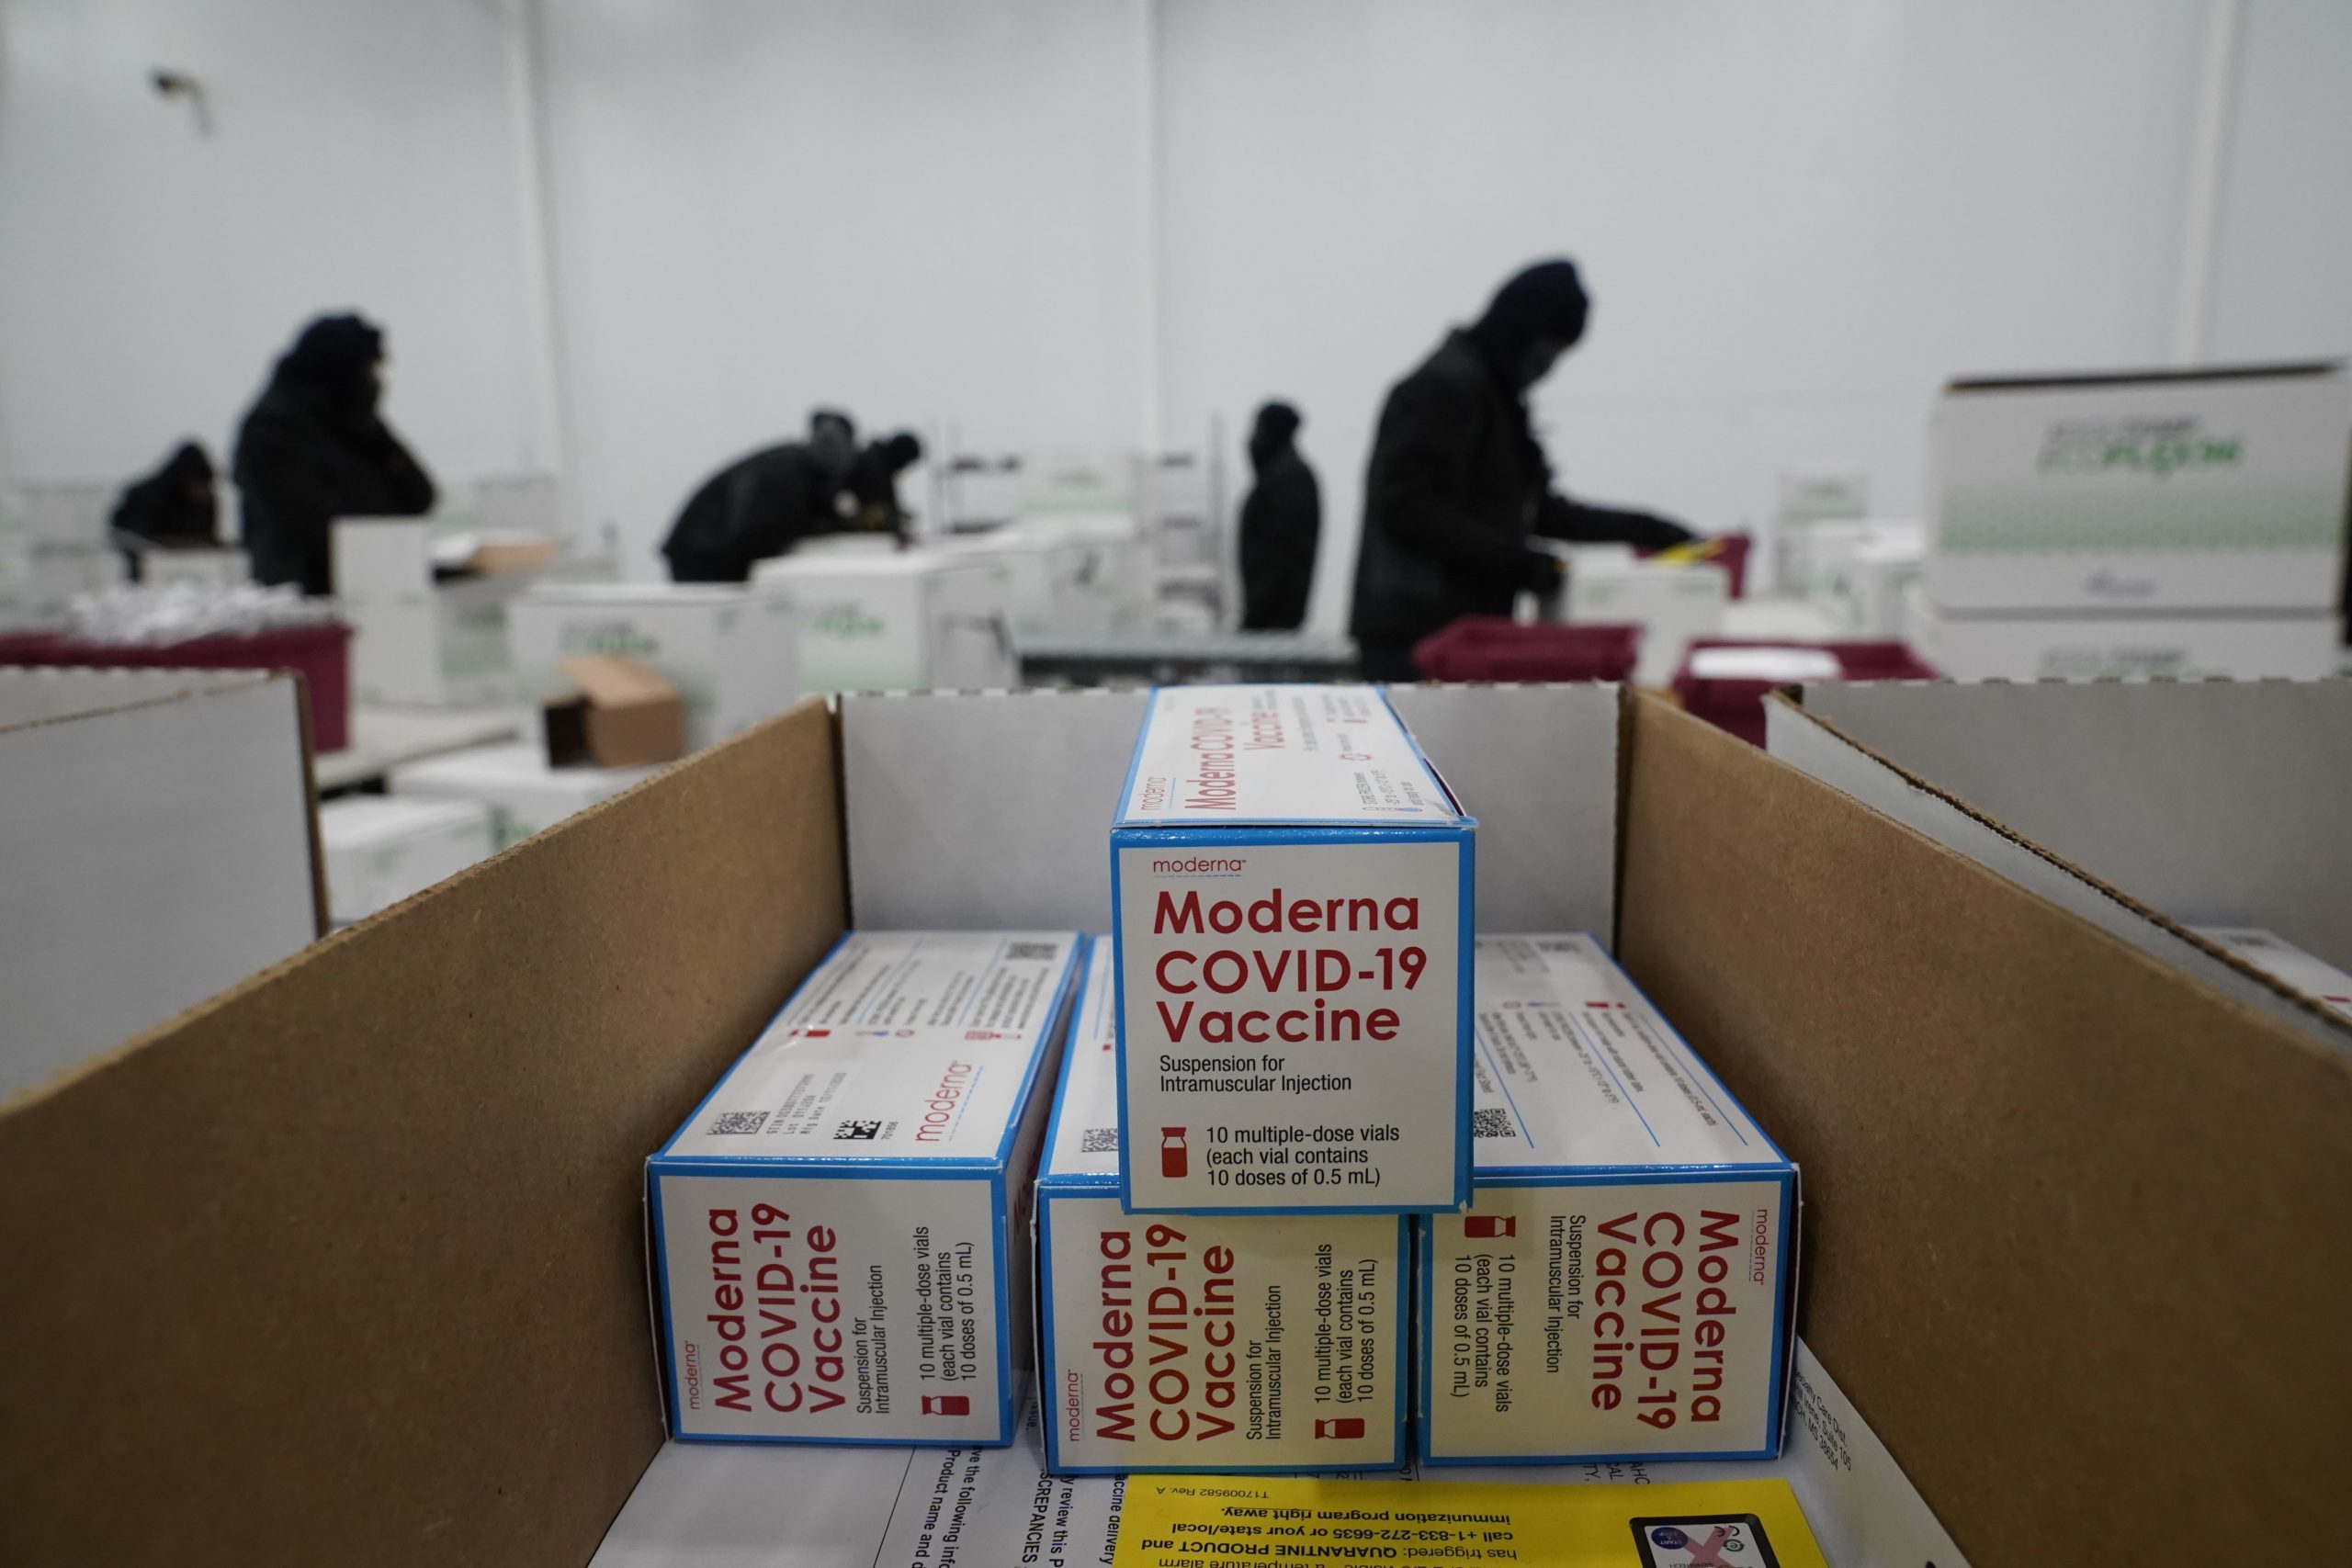 TOPSHOT - Boxes containing the Moderna Covid-19 vaccine are prepared to be shipped at the McKesson distribution center in Olive Branch, Mississippi, on December 20, 2020. (Photo by Paul Sancya / POOL / AFP) (Photo by PAUL SANCYA/POOL/AFP via Getty Images)